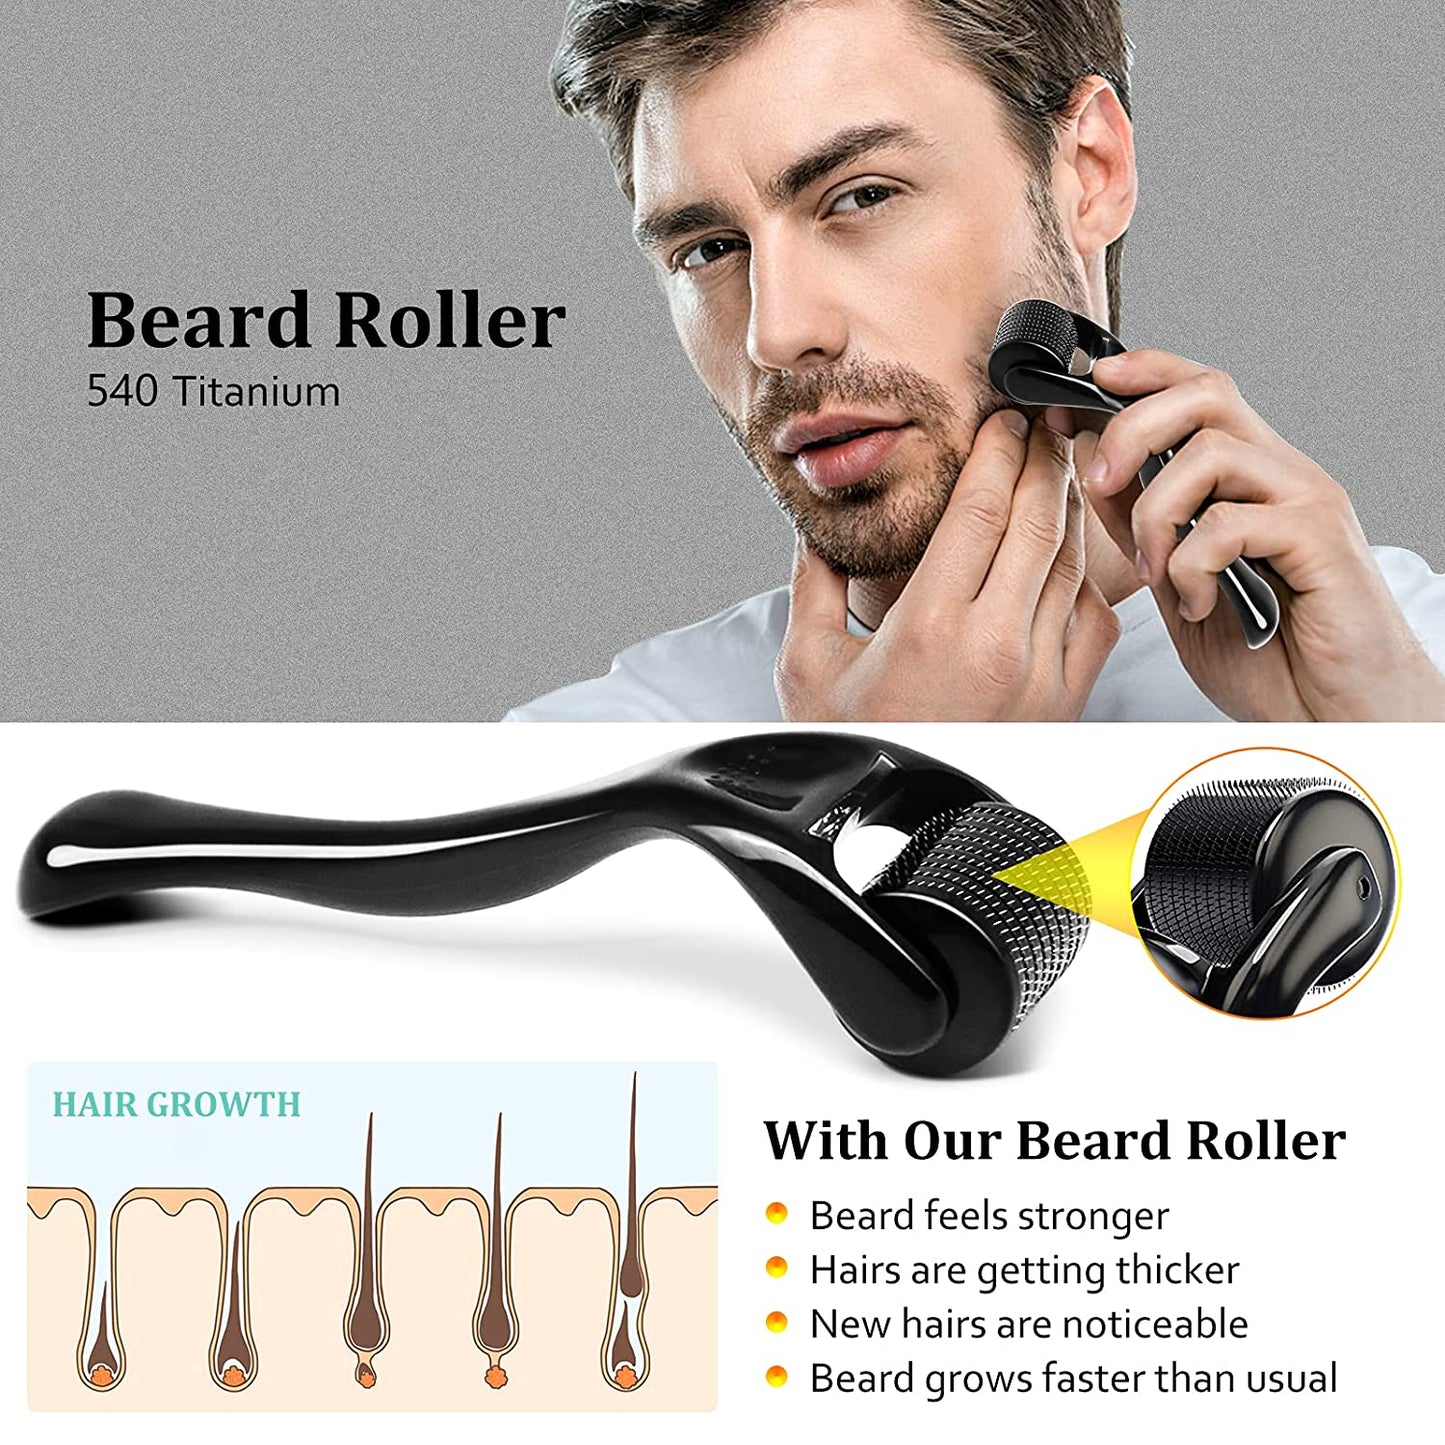 Beard Growth Kit - Beard Kit with Beard Roller Beard Growth Oil Beard Wax Beard Comb, Derma Roller for Beard Growth, Birthday Day Gifts for Men - Valentines Day Gifts for Him Boyfriend Husband Fiance